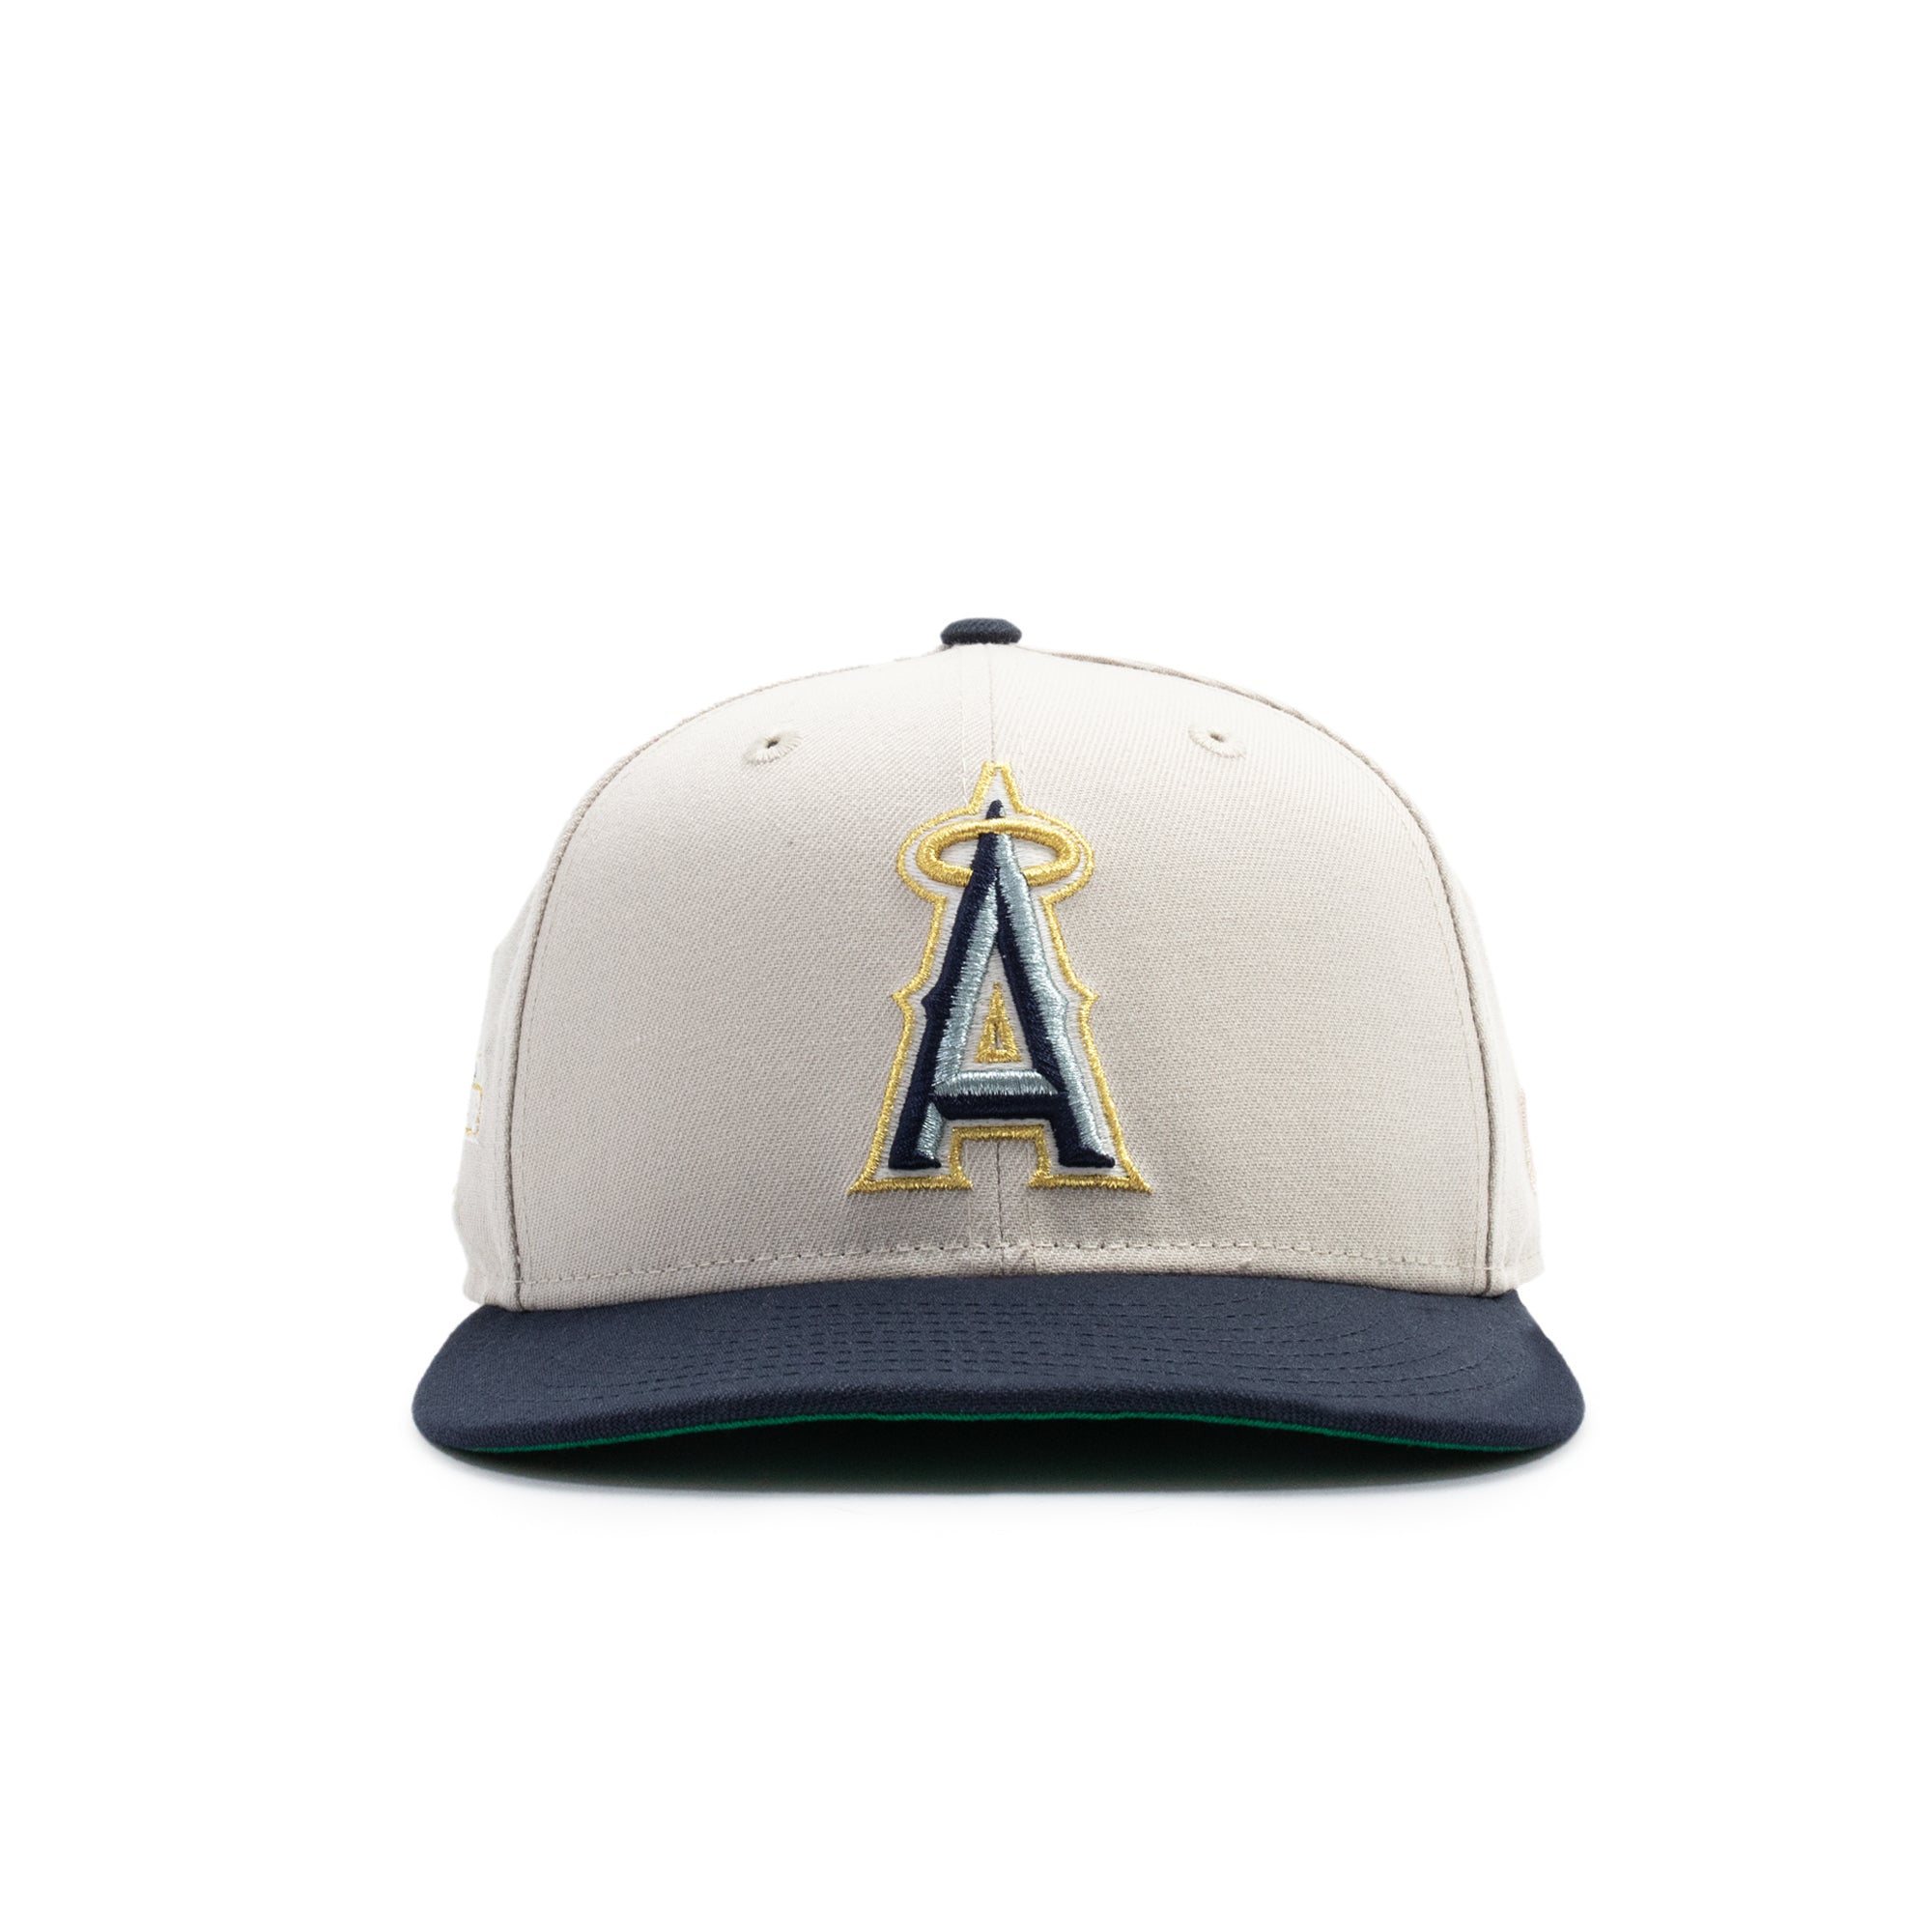 New Era 59Fifty Anaangco 10 ASG Stone NSN Fitted Hat